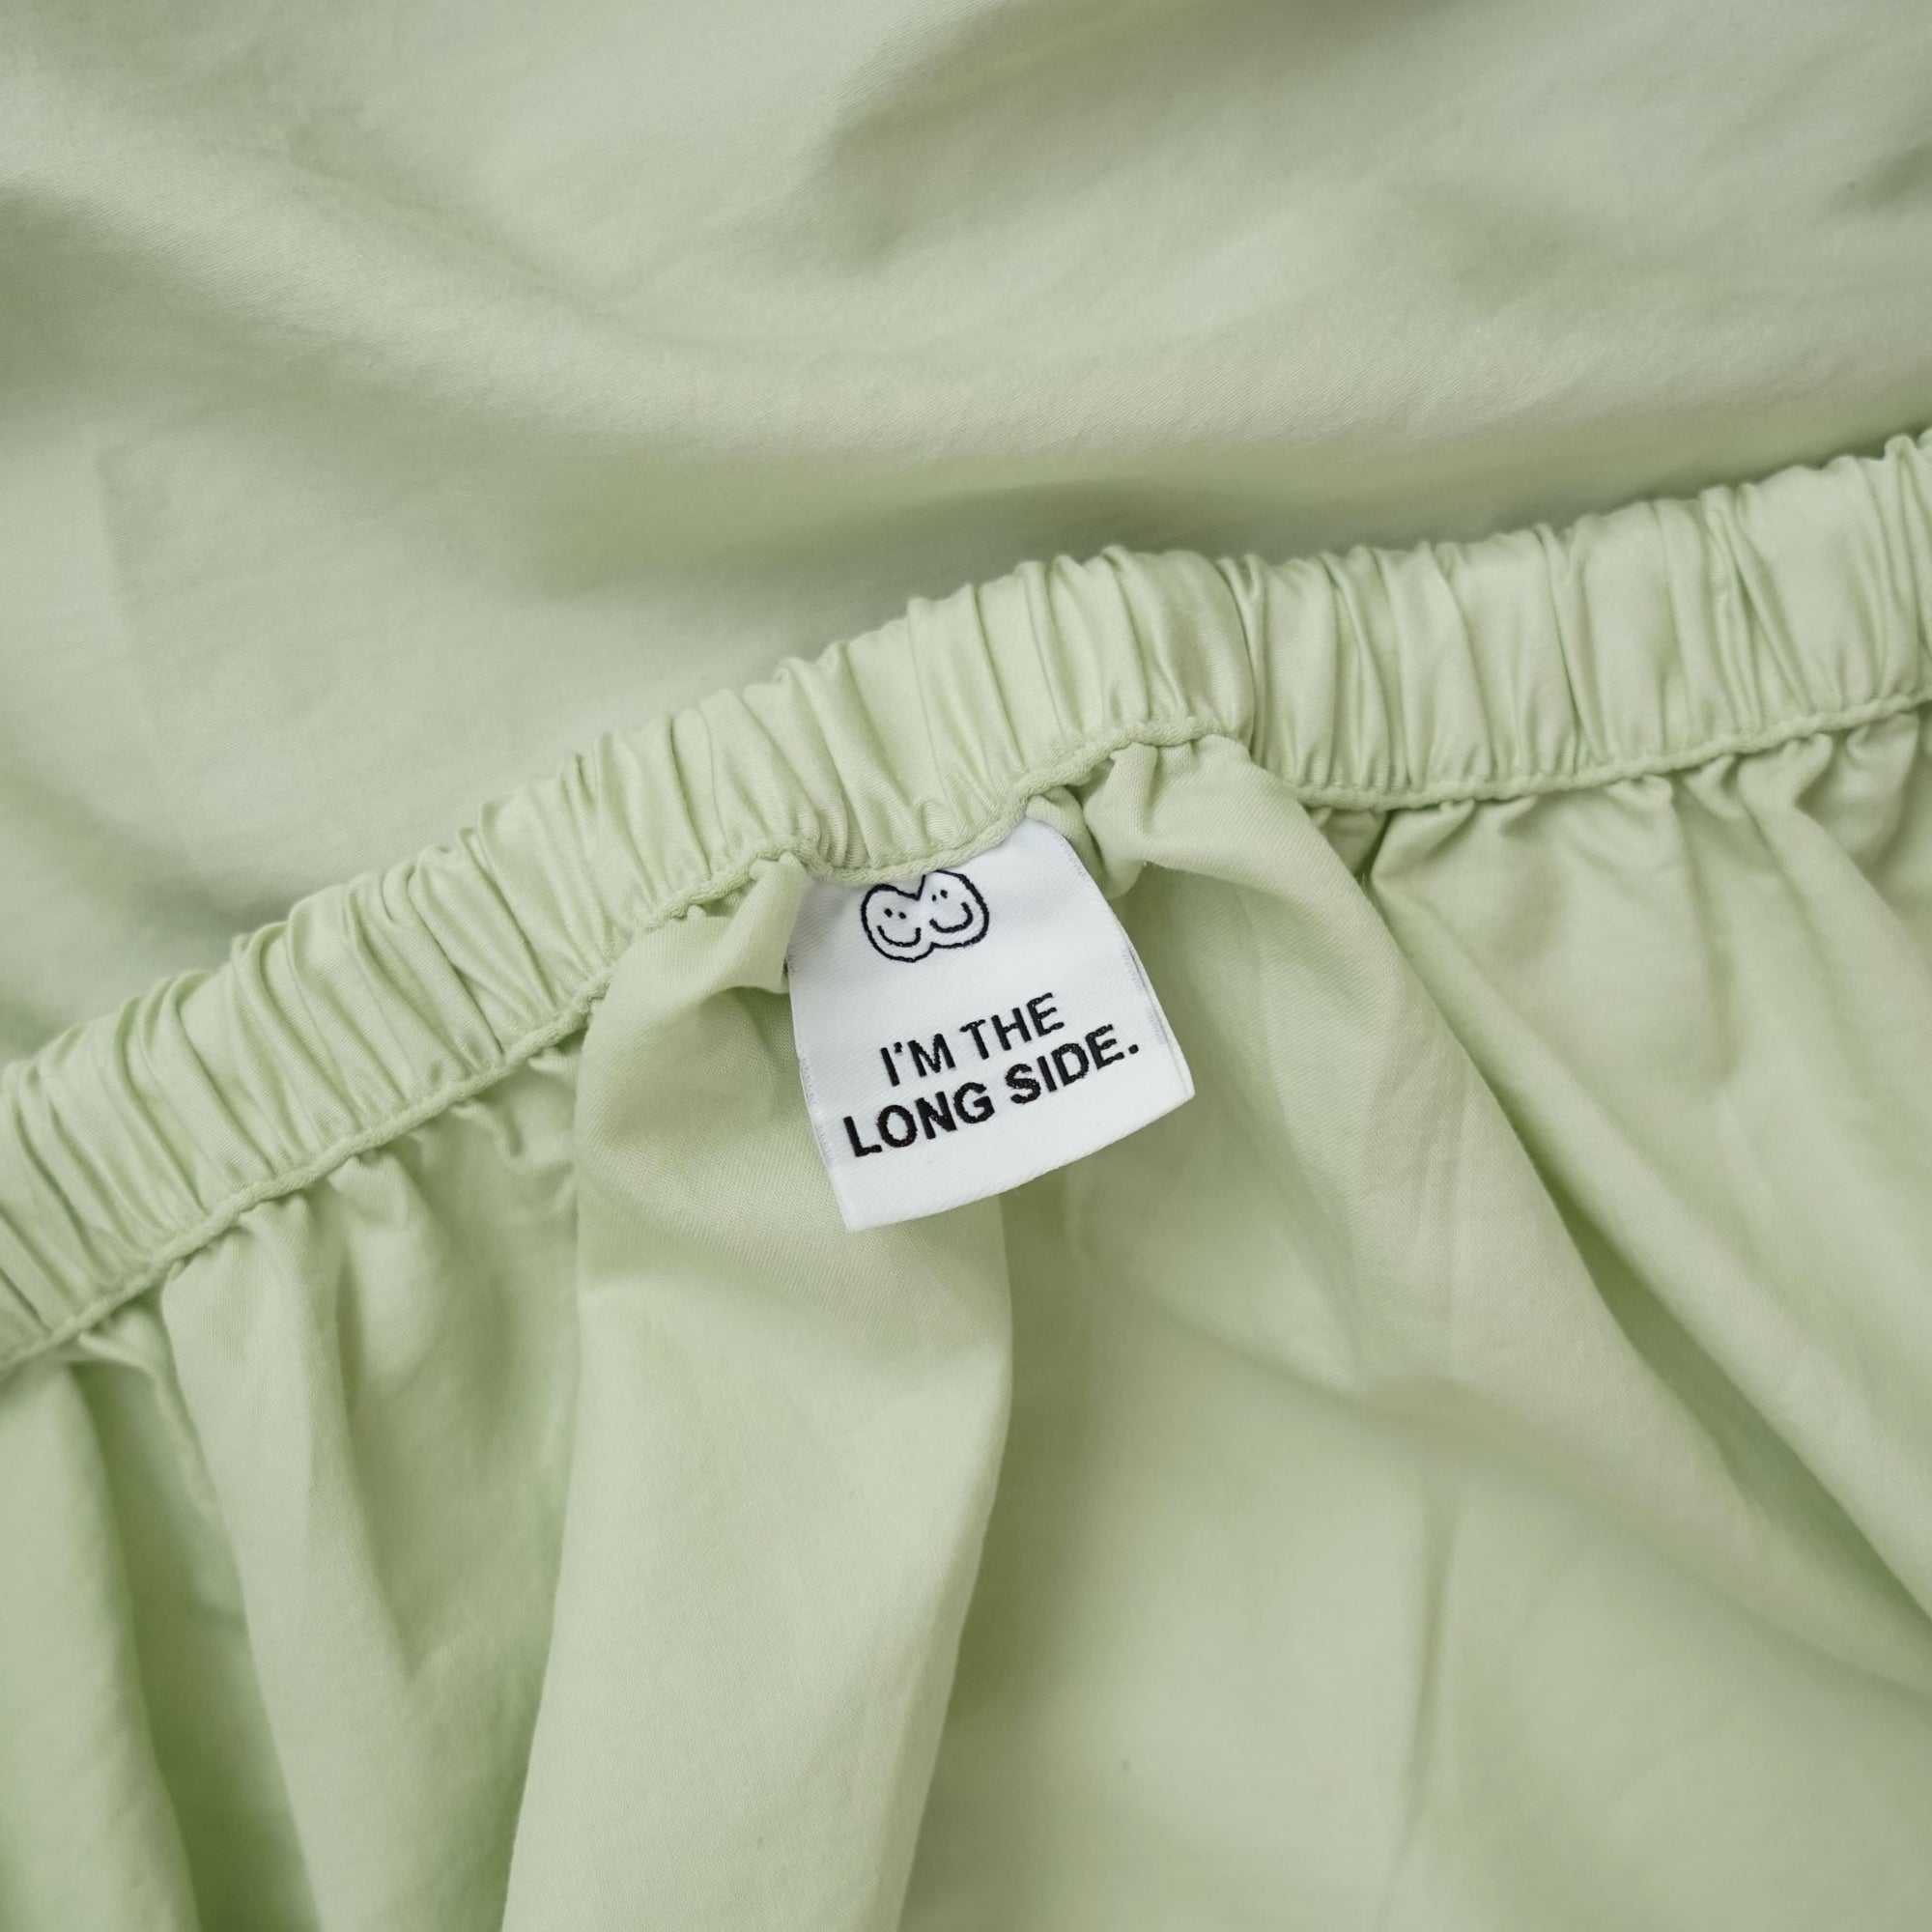 Roomie matcha green organic cotton fitted sheet with tag guide